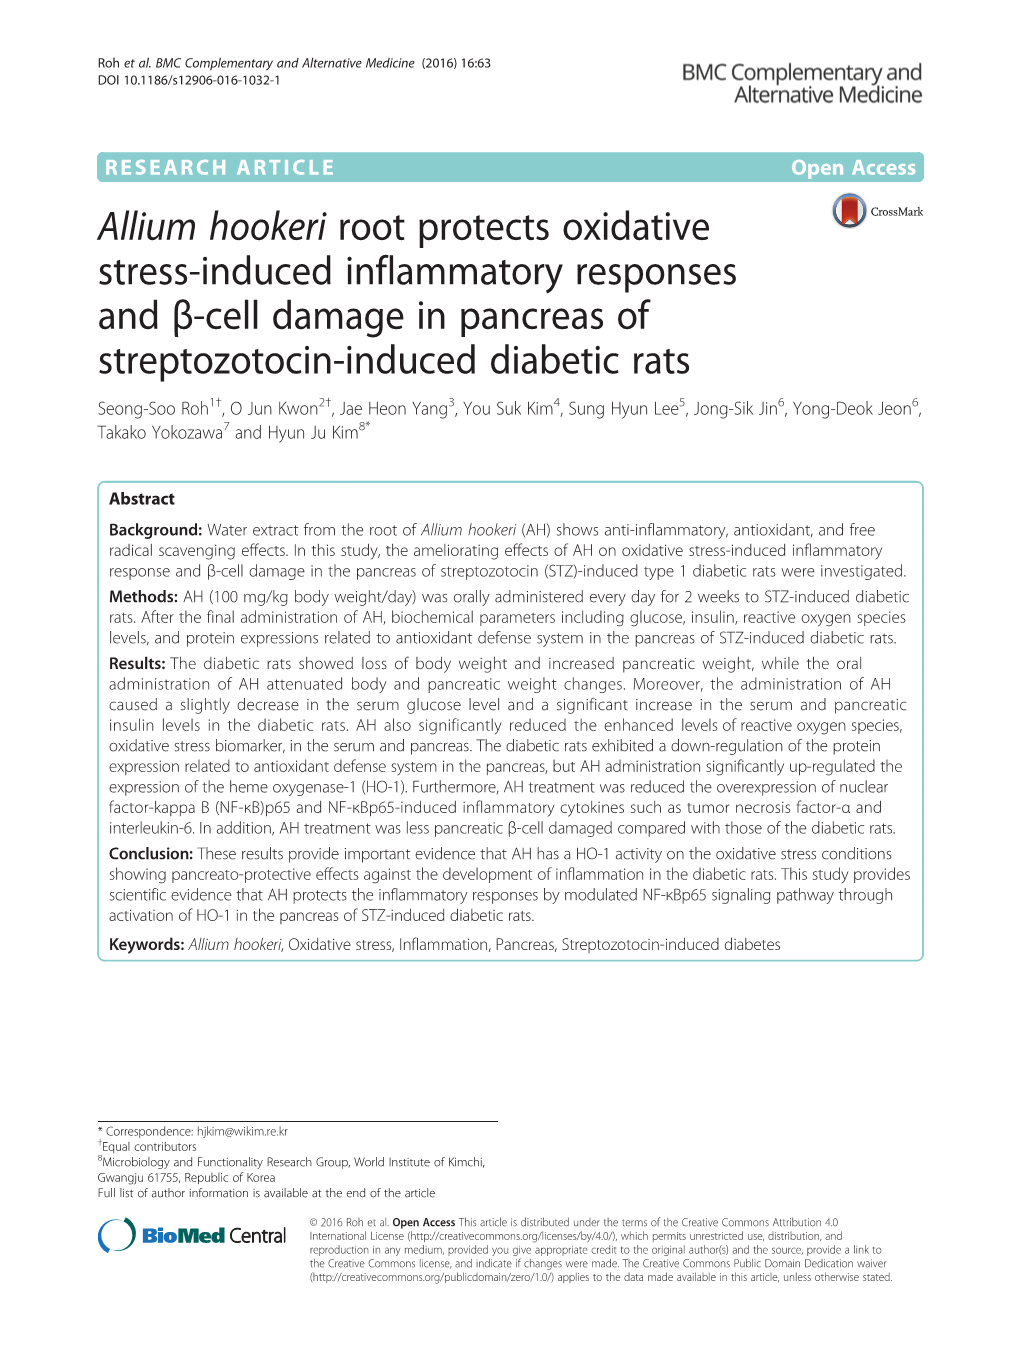 Allium Hookeri Root Protects Oxidative Stress-Induced Inflammatory Responses and Β-Cell Damage in Pancreas of Streptozotocin-In